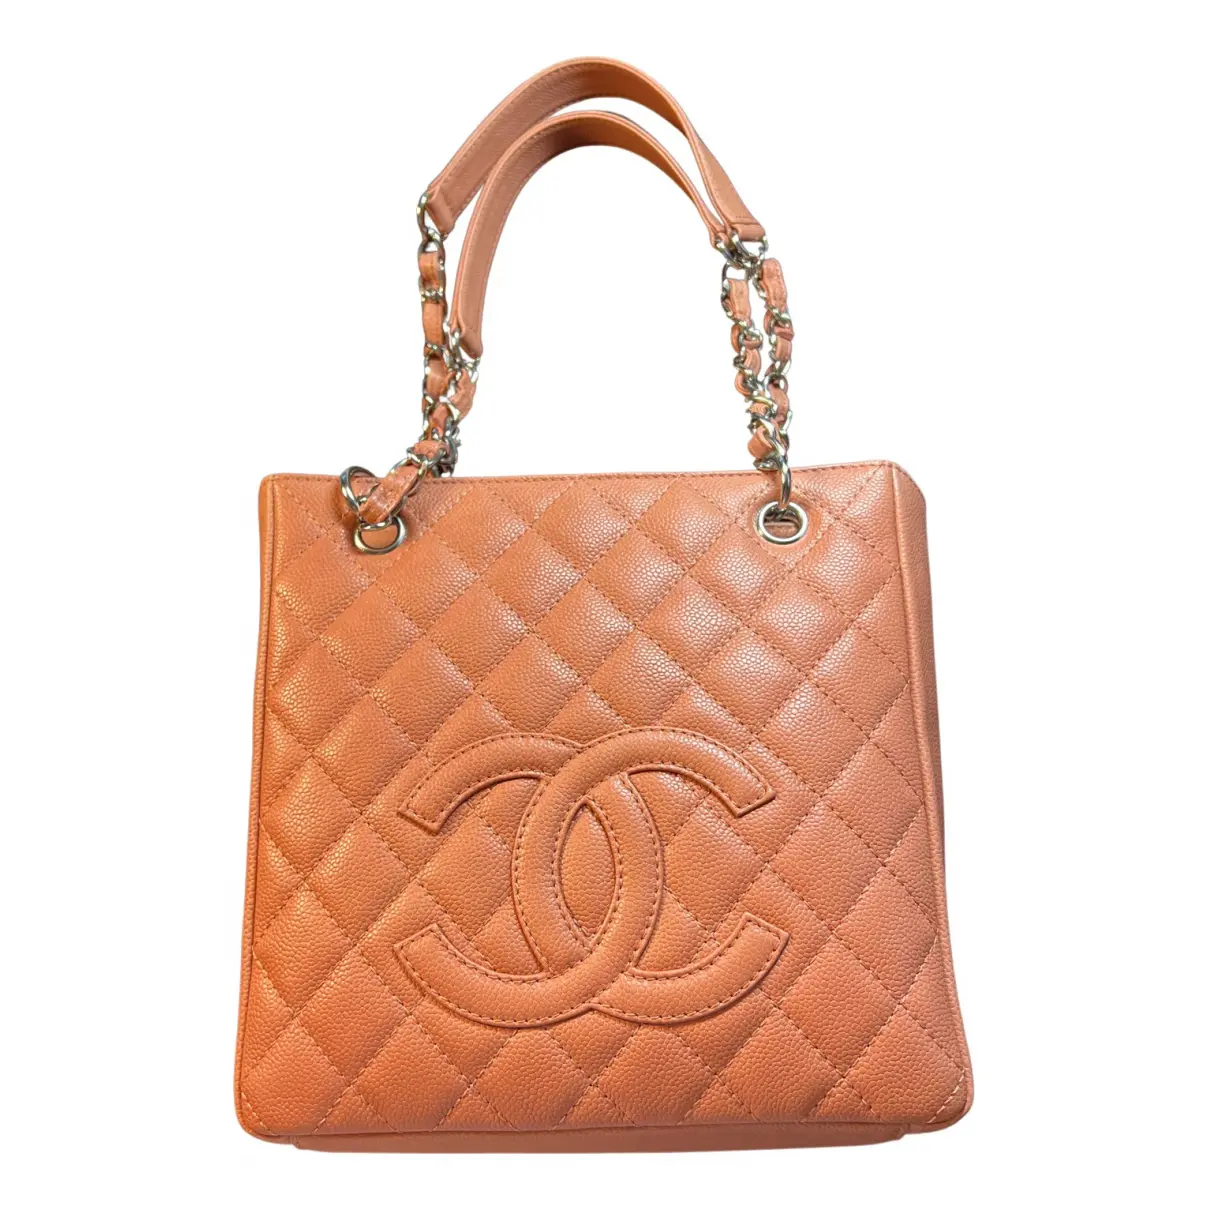 Petite Shopping Tote leather tote Chanel - Vintage